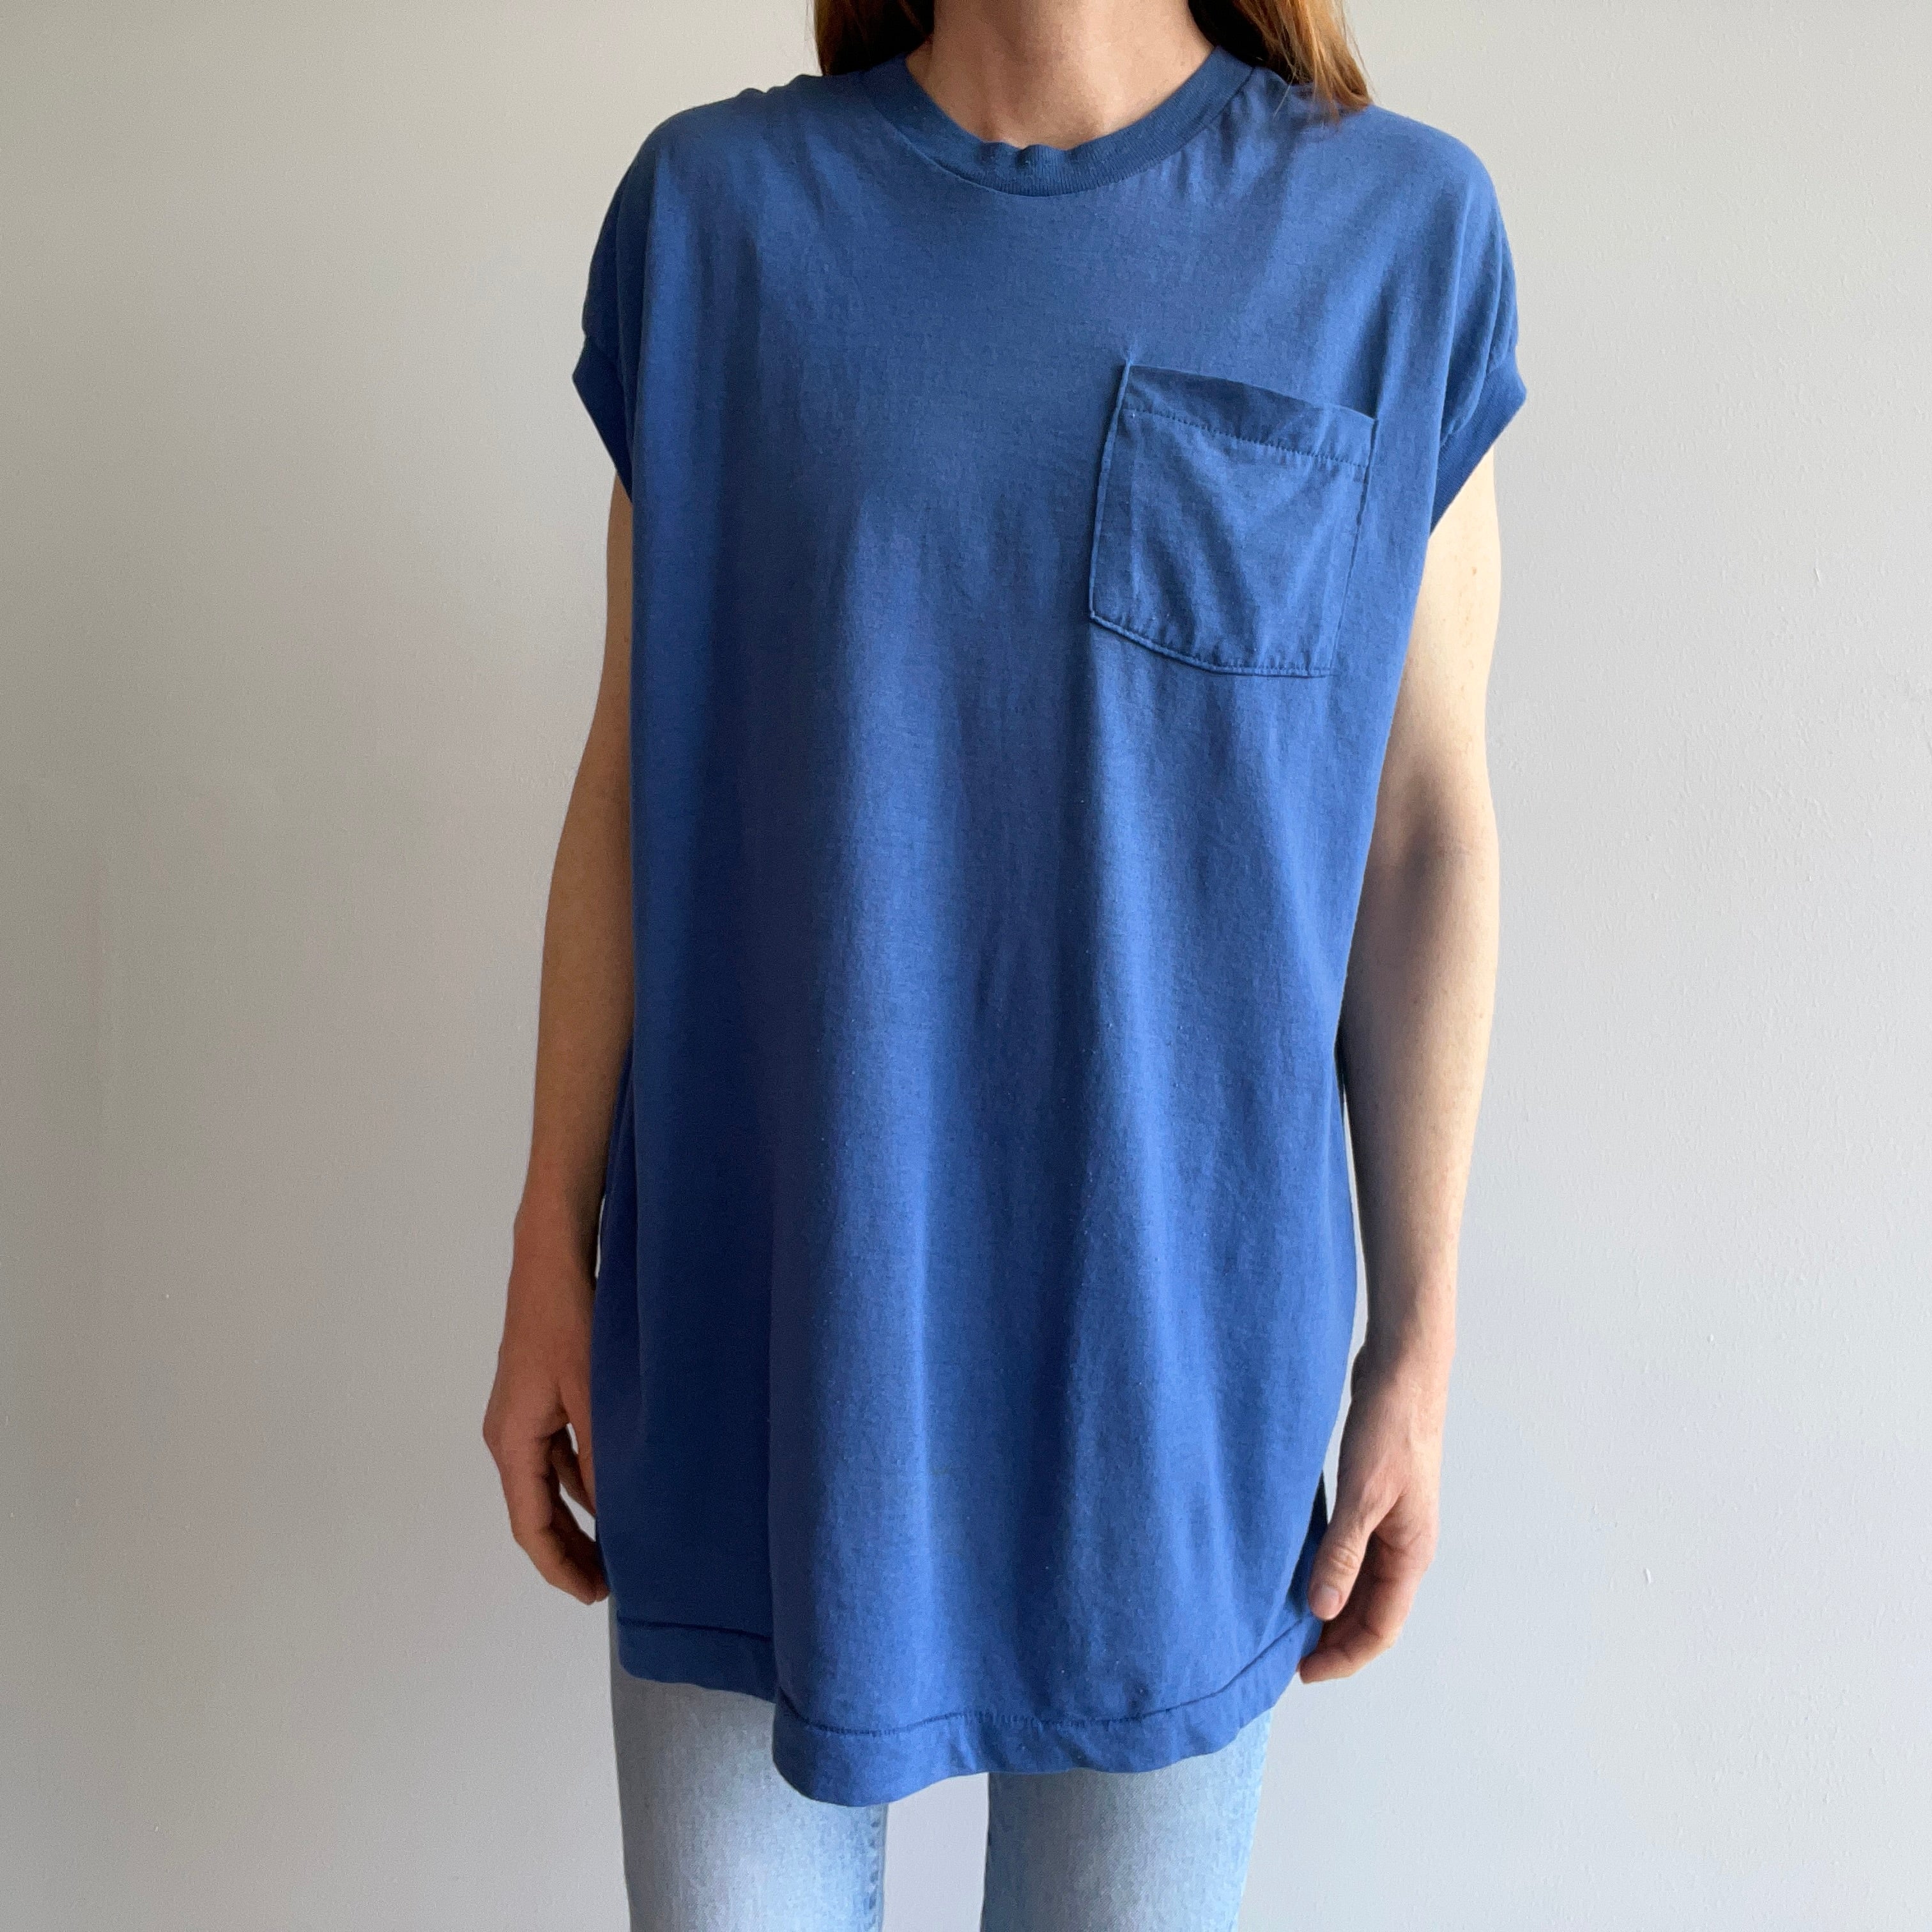 1980s Thinned Out Super Slouchy and Worn Single Stitch Selvedge Pocket Muscle Tank - Sky Blue